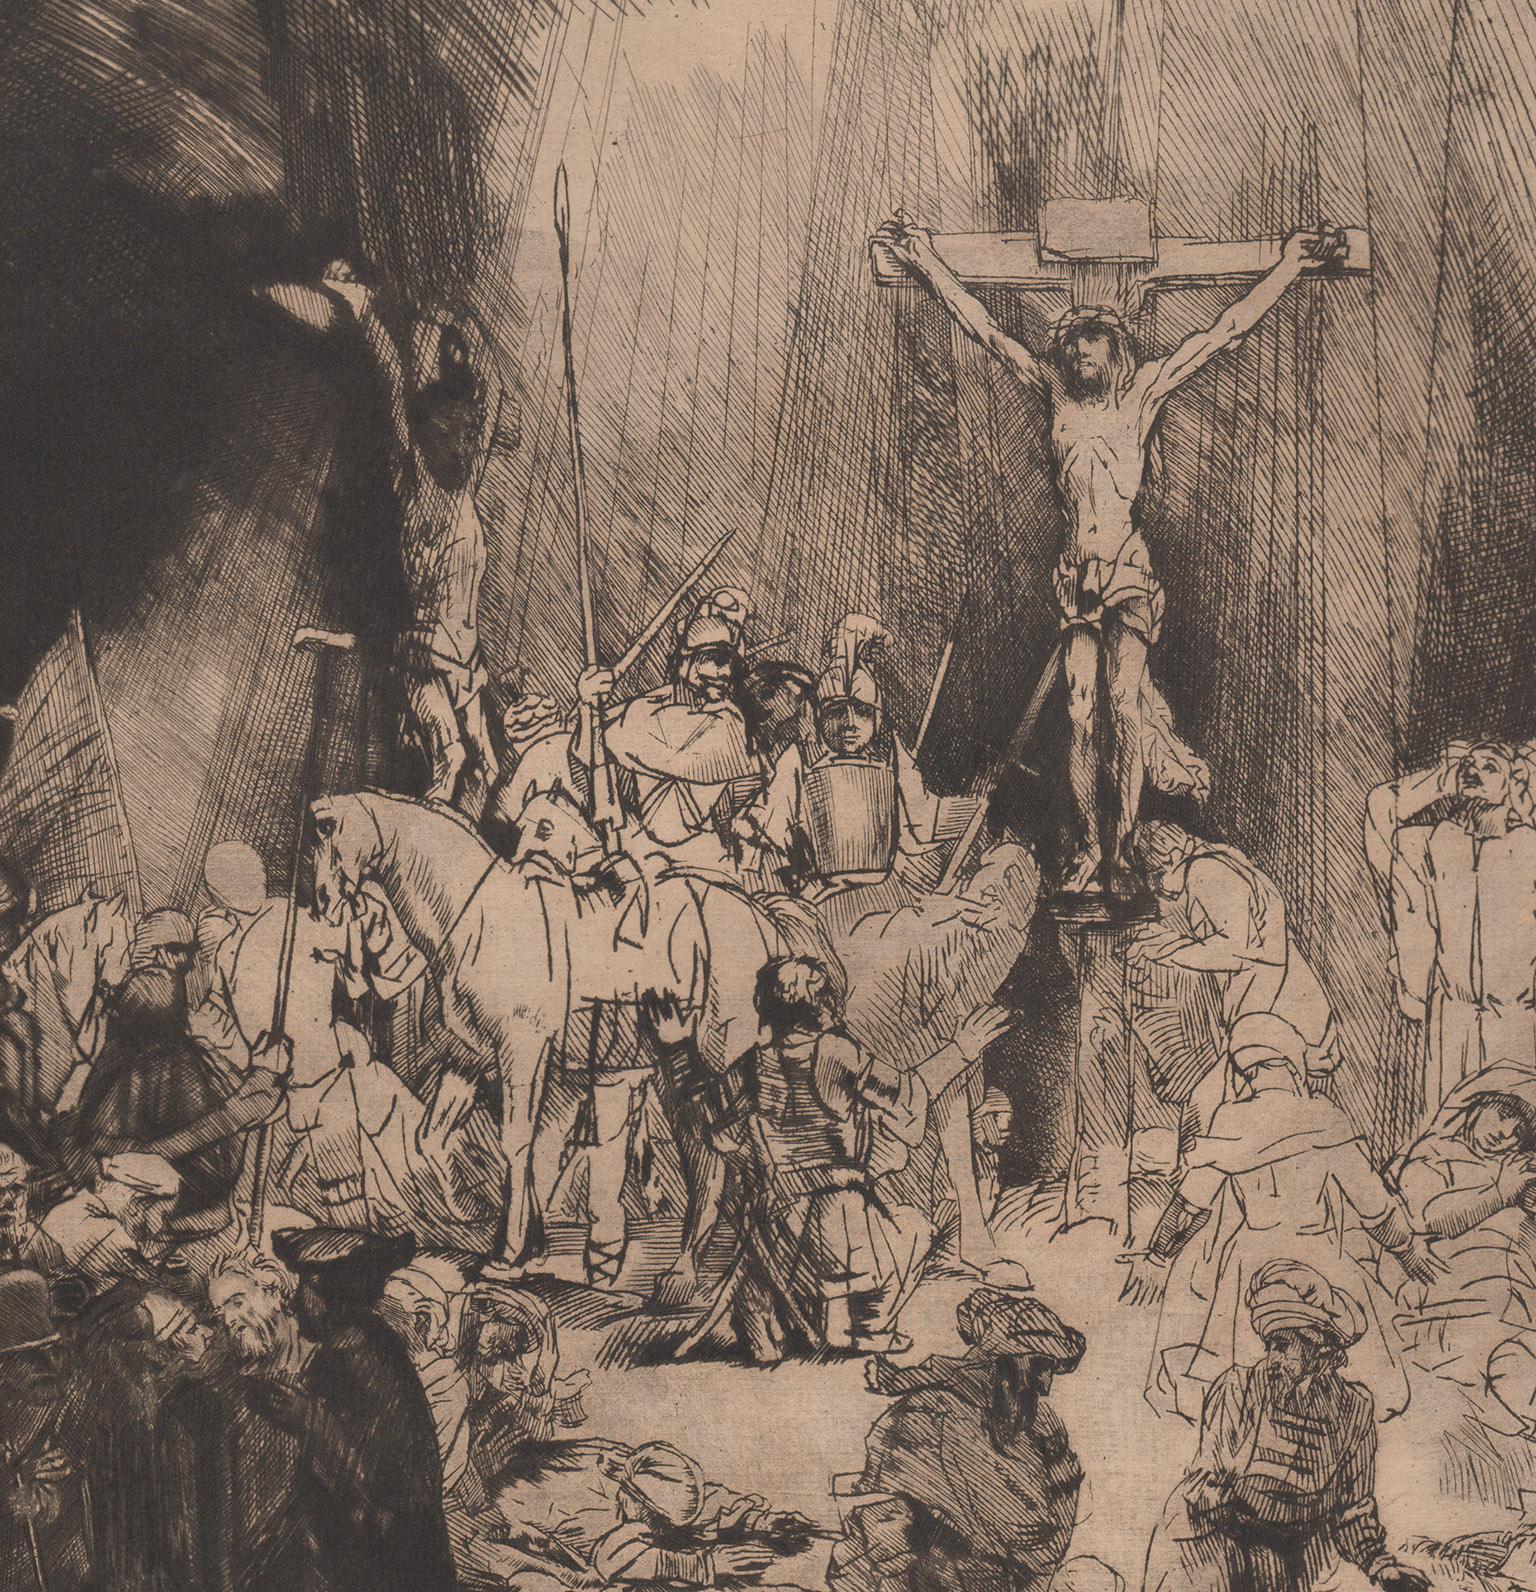 The Three Crosses, etching by Armand-Durand after Rembrandt, circa 1880 - Print by Armand Durand